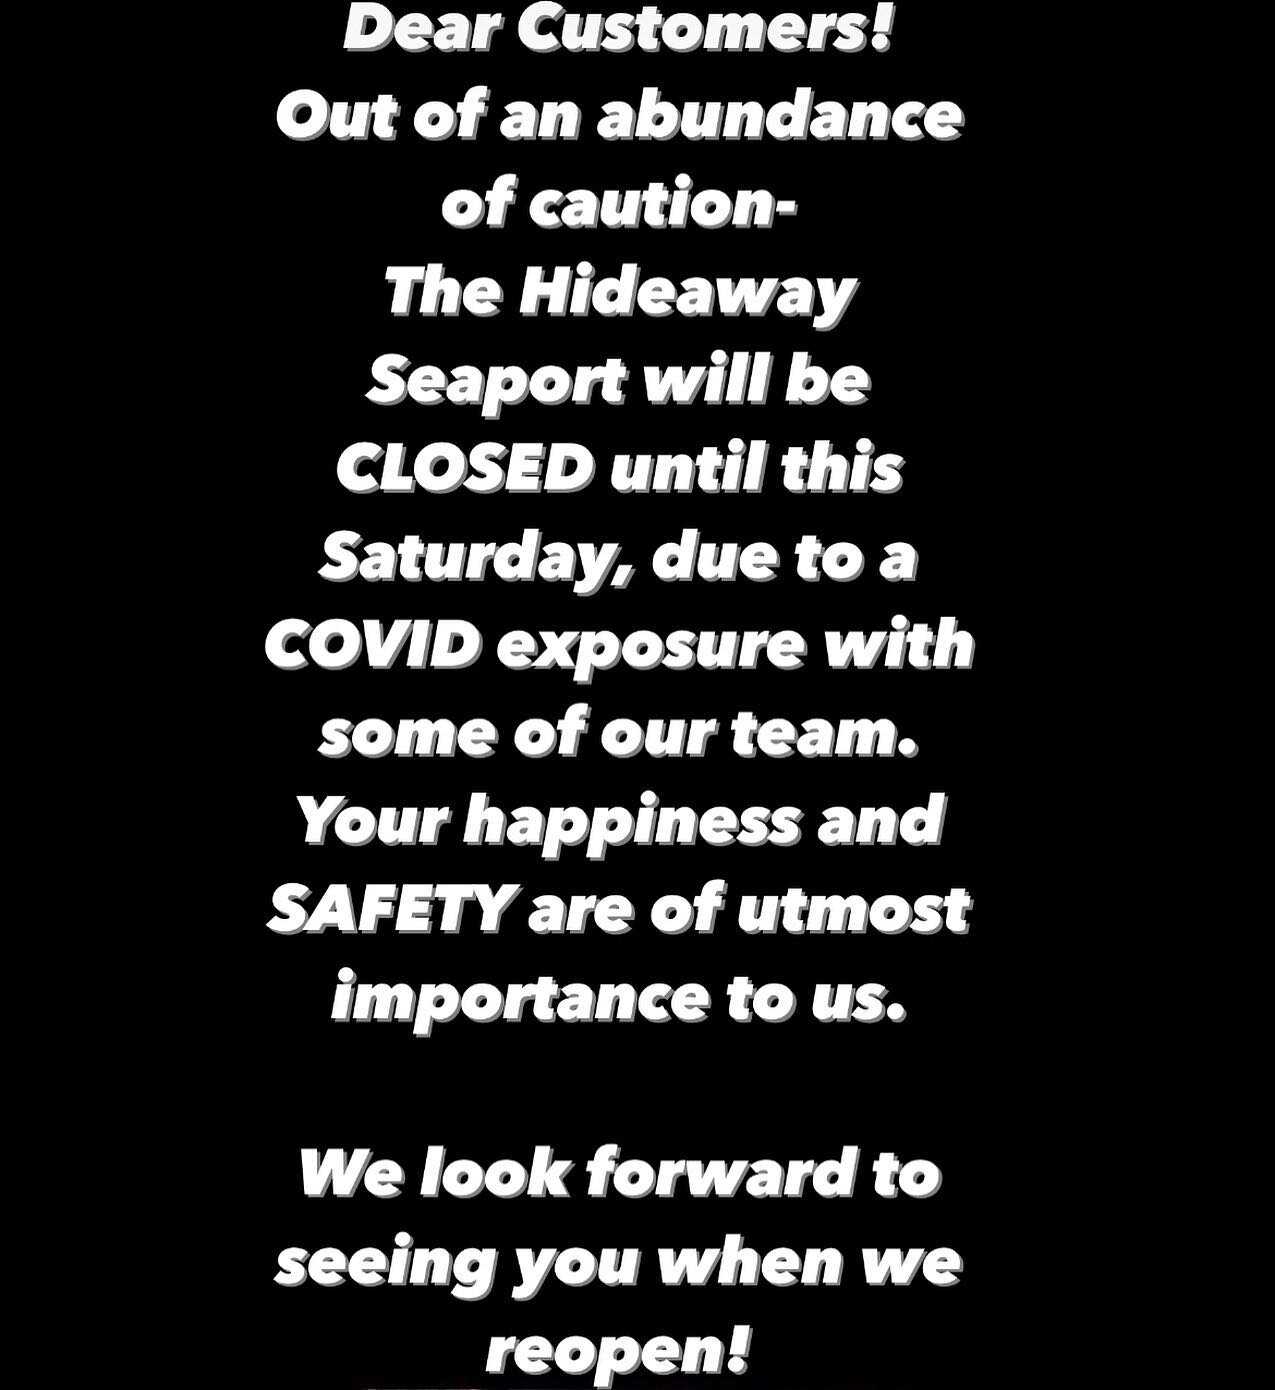 Dear Customers! 

Out of an abundance of caution- 
The Hideaway Seaport will be CLOSED until this Saturday, due to a COVID exposure with some of our team. Your happiness and SAFETY are of utmost importance to us. 

We look forward to seeing you when 